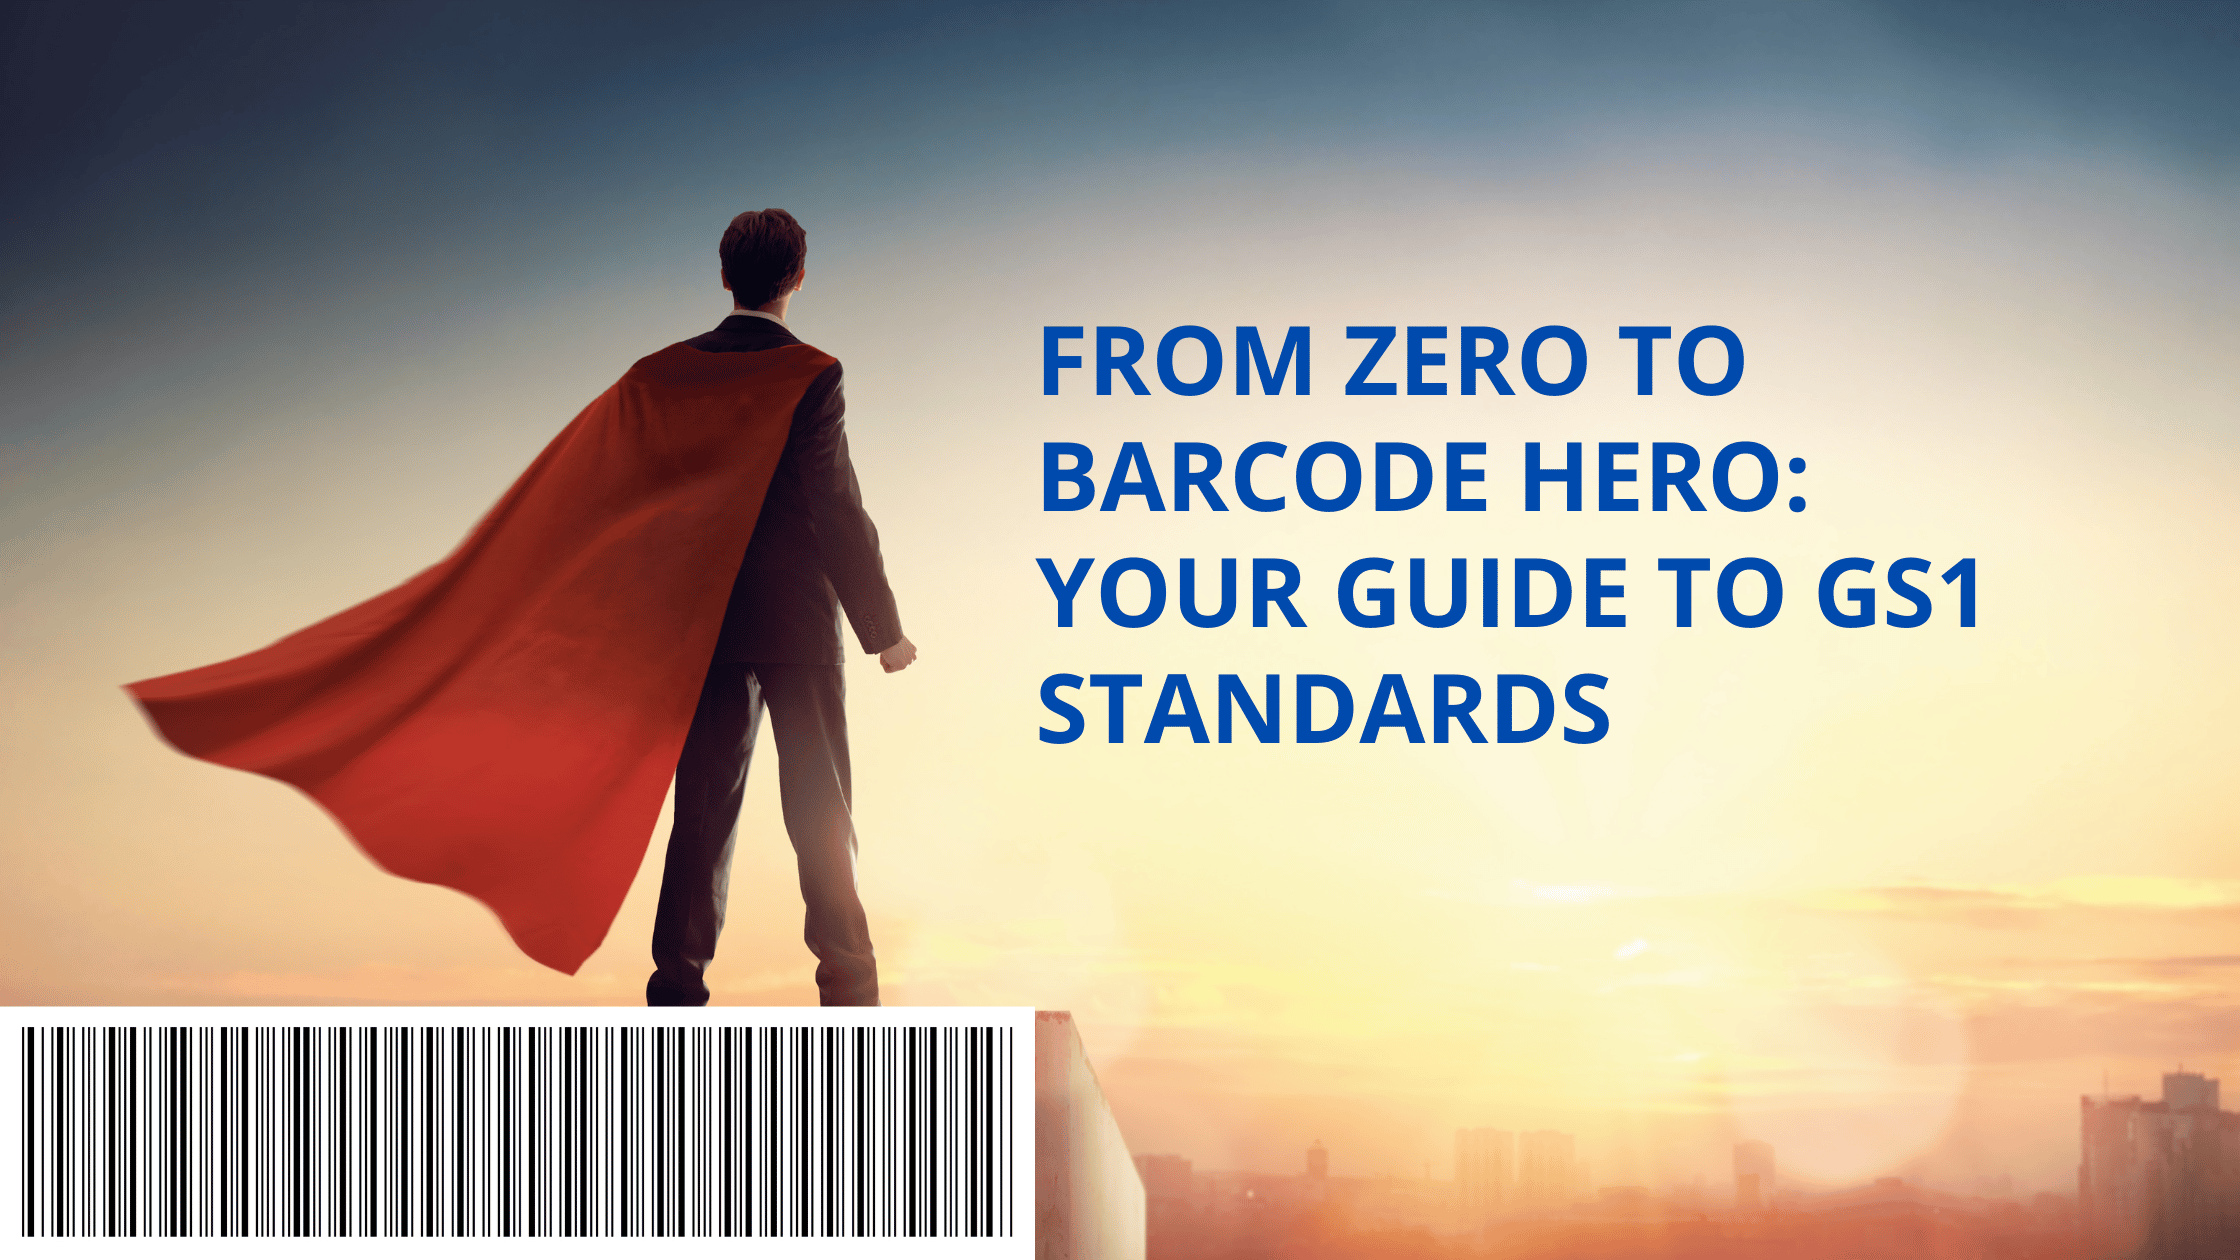 Corporate superhero standing on top of a barcode after learning how to get you gs1 barcodes.